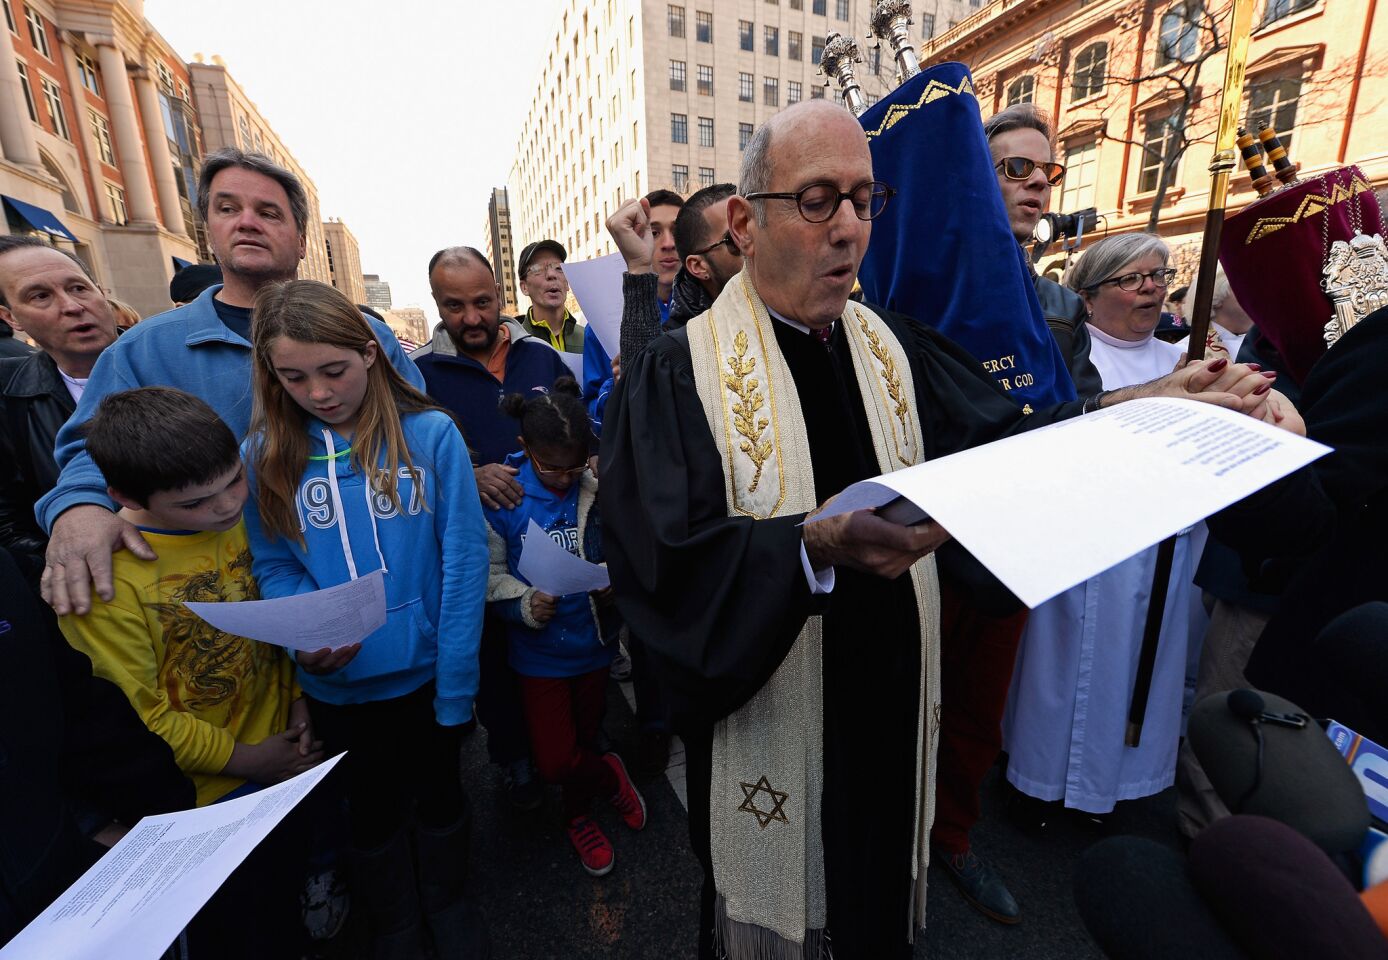 Rabbi Howard Berman of Central Reform Temple participates in an interfaith memorial service near a makeshift memorial for victims of the Boston Marathon bombings.